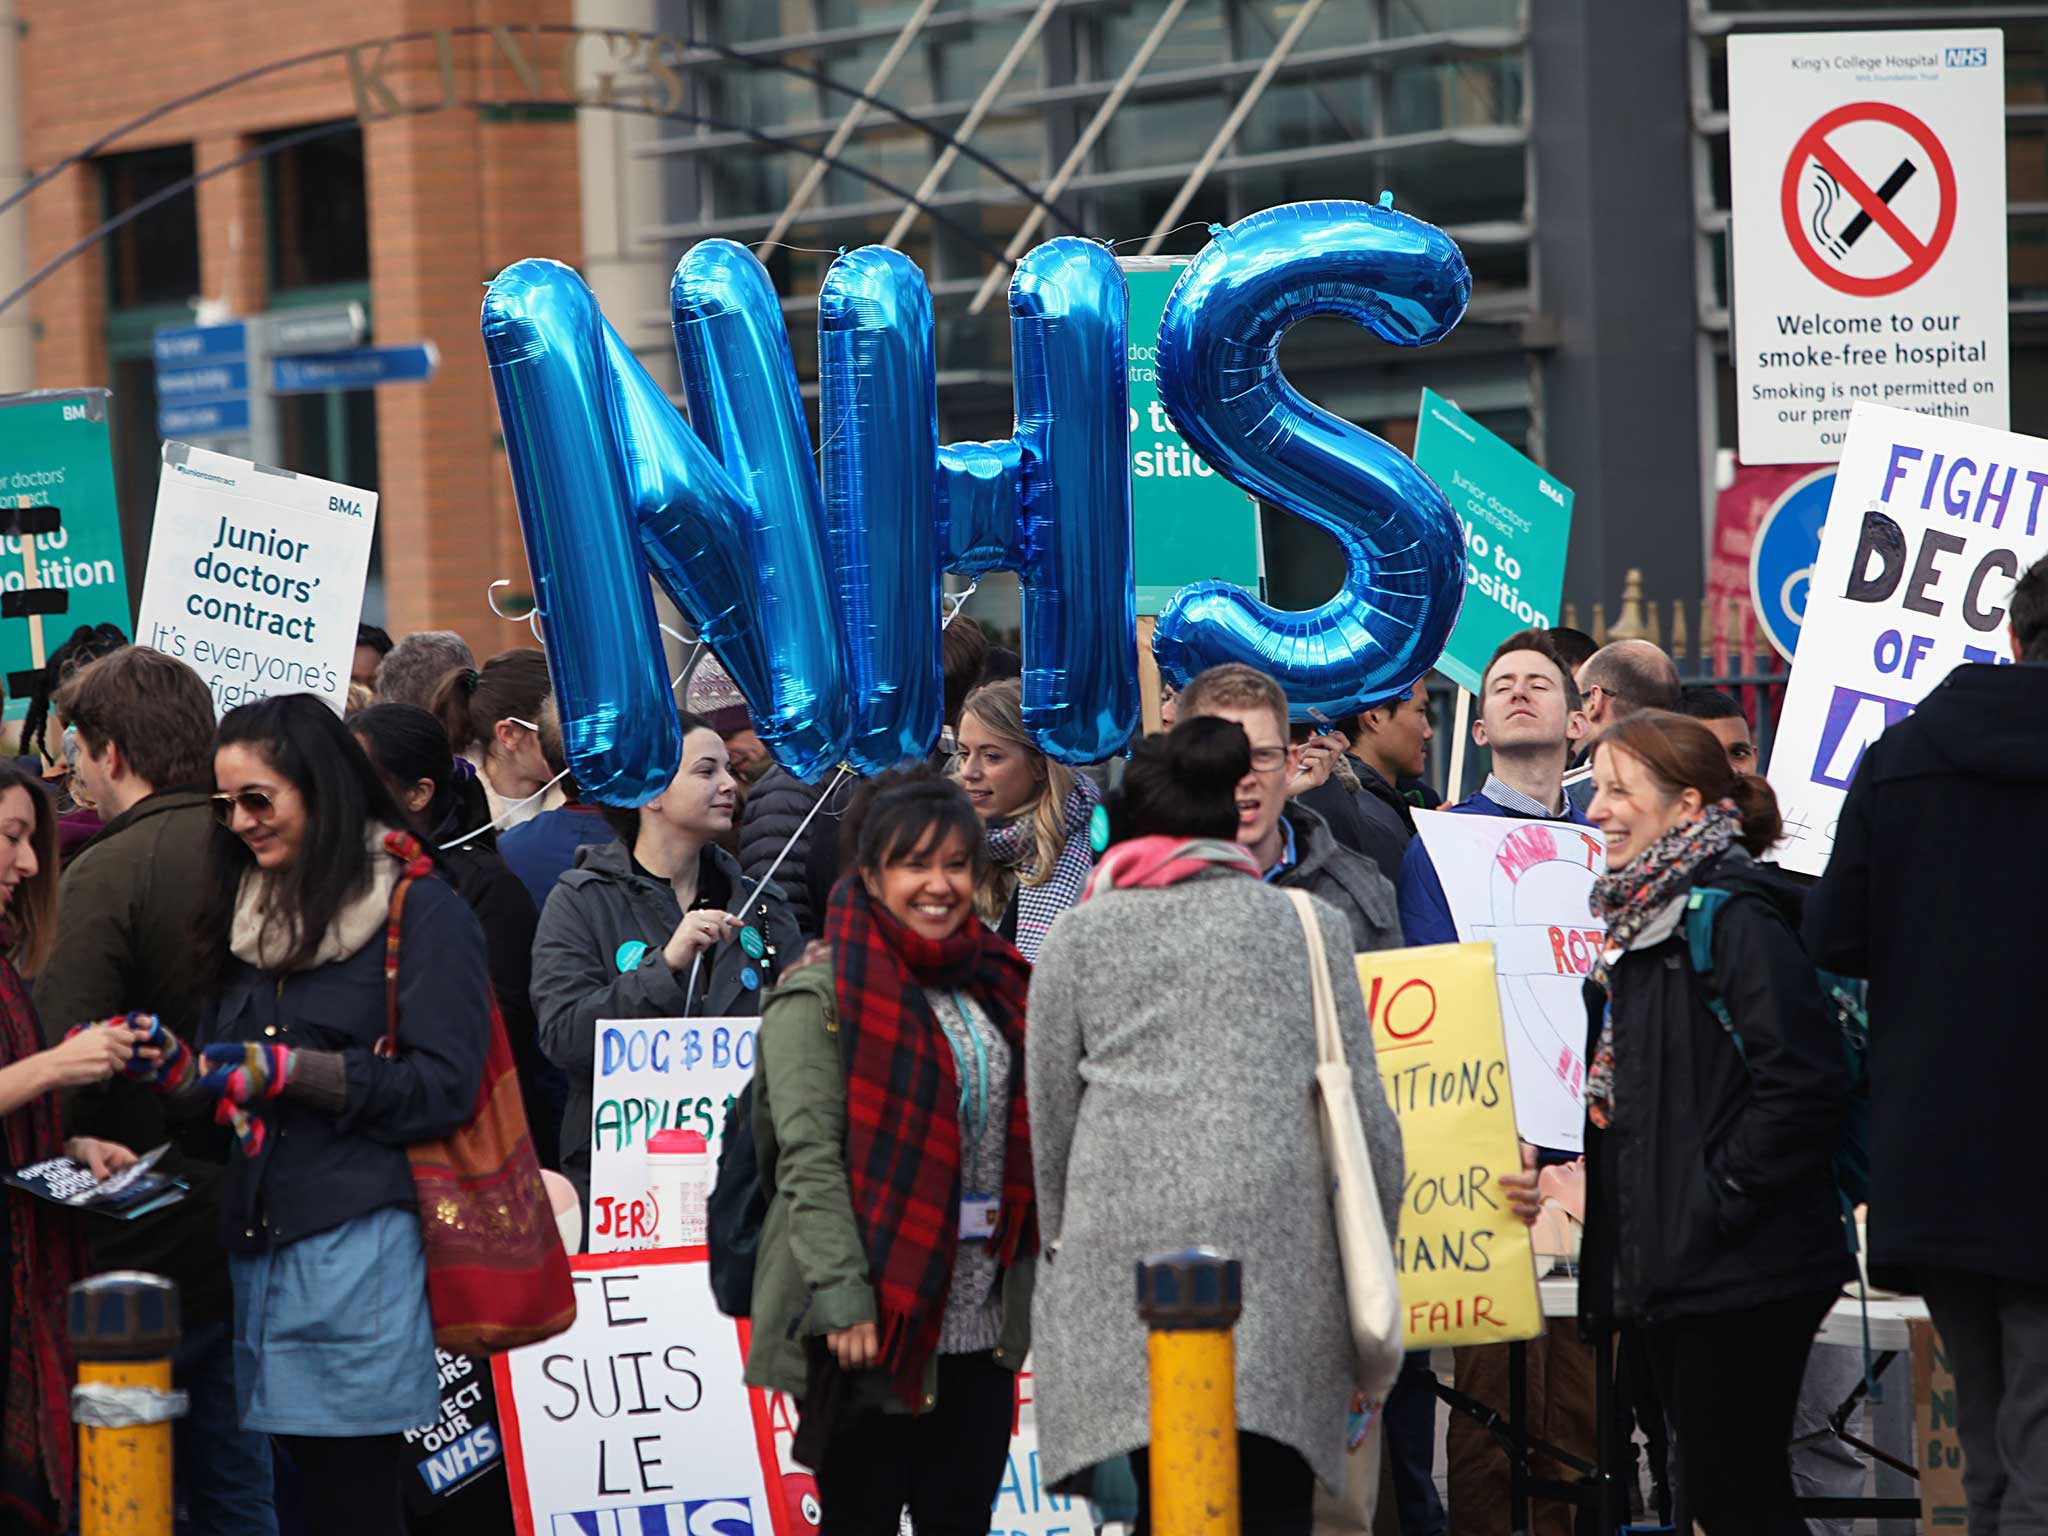 Junior doctors walked out of routine and emergency care 26th April 2016